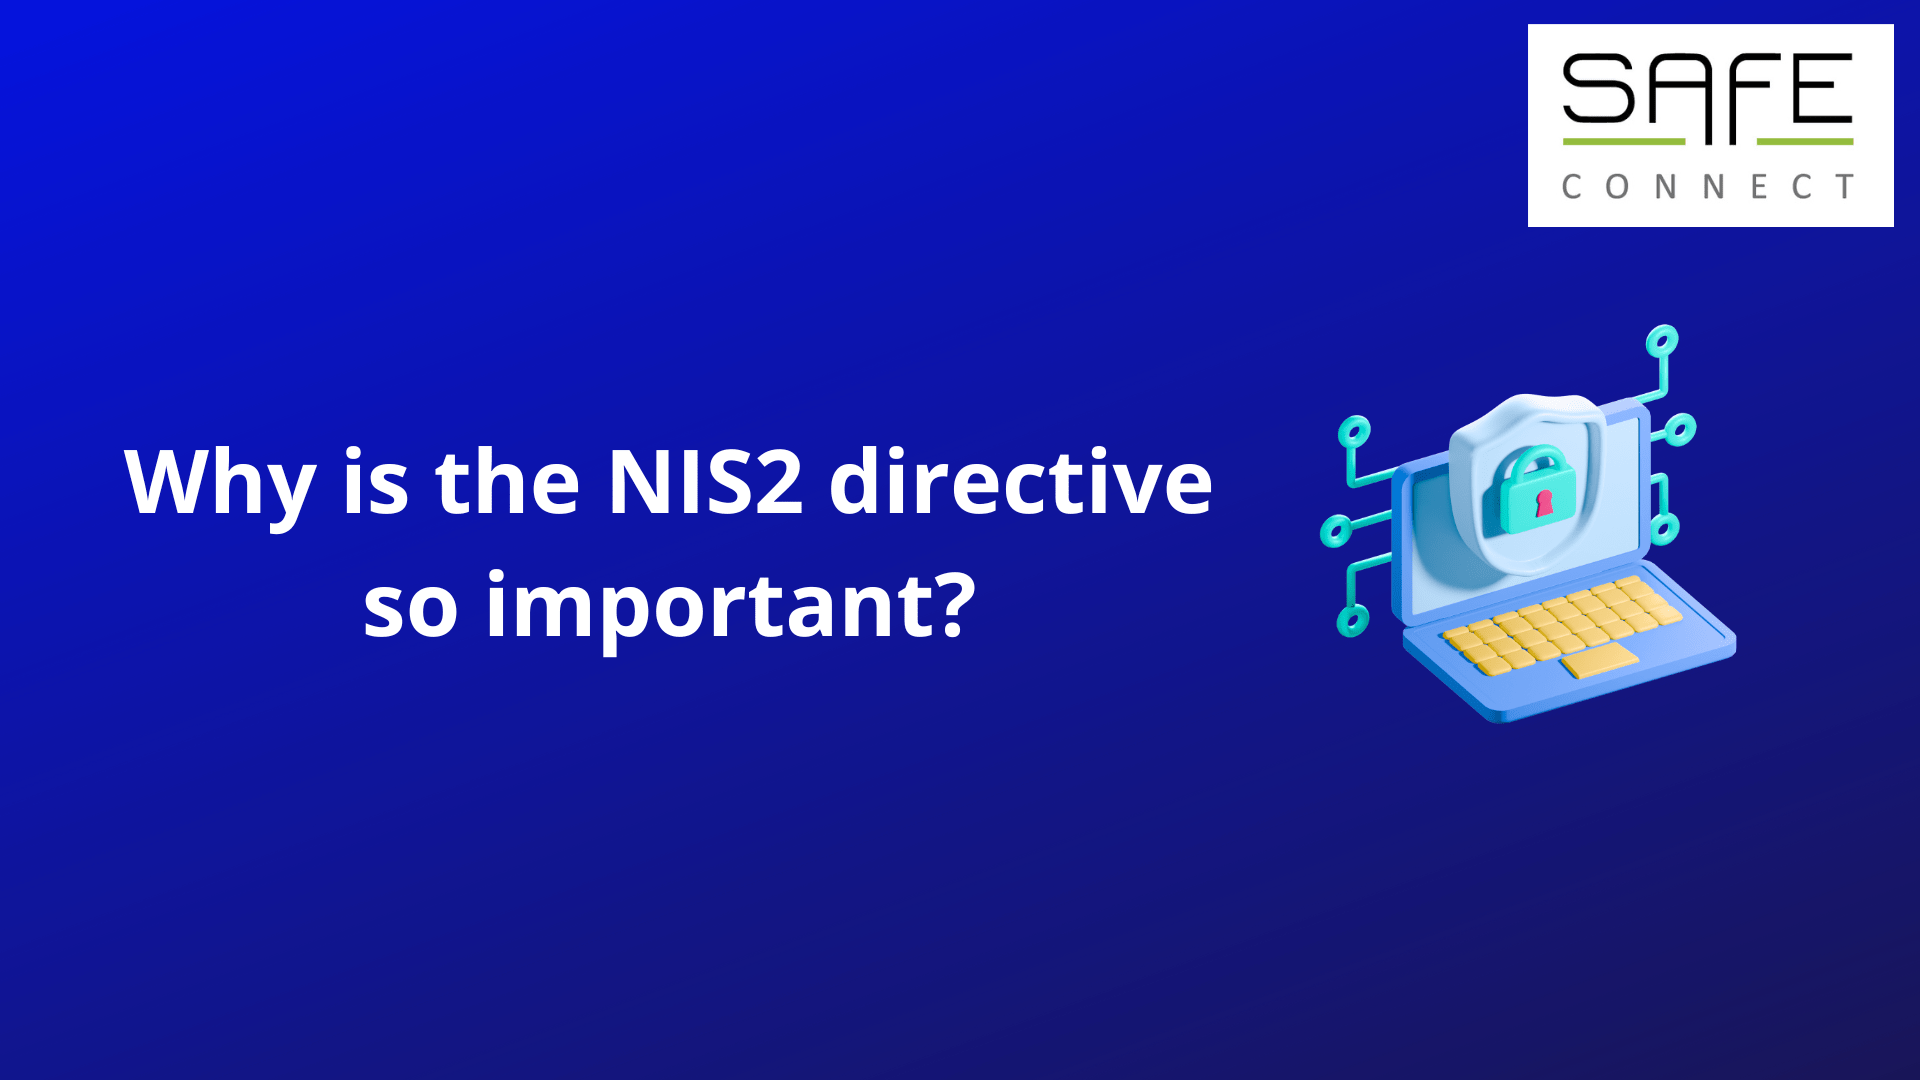 Why is the NIS2 directive so important?